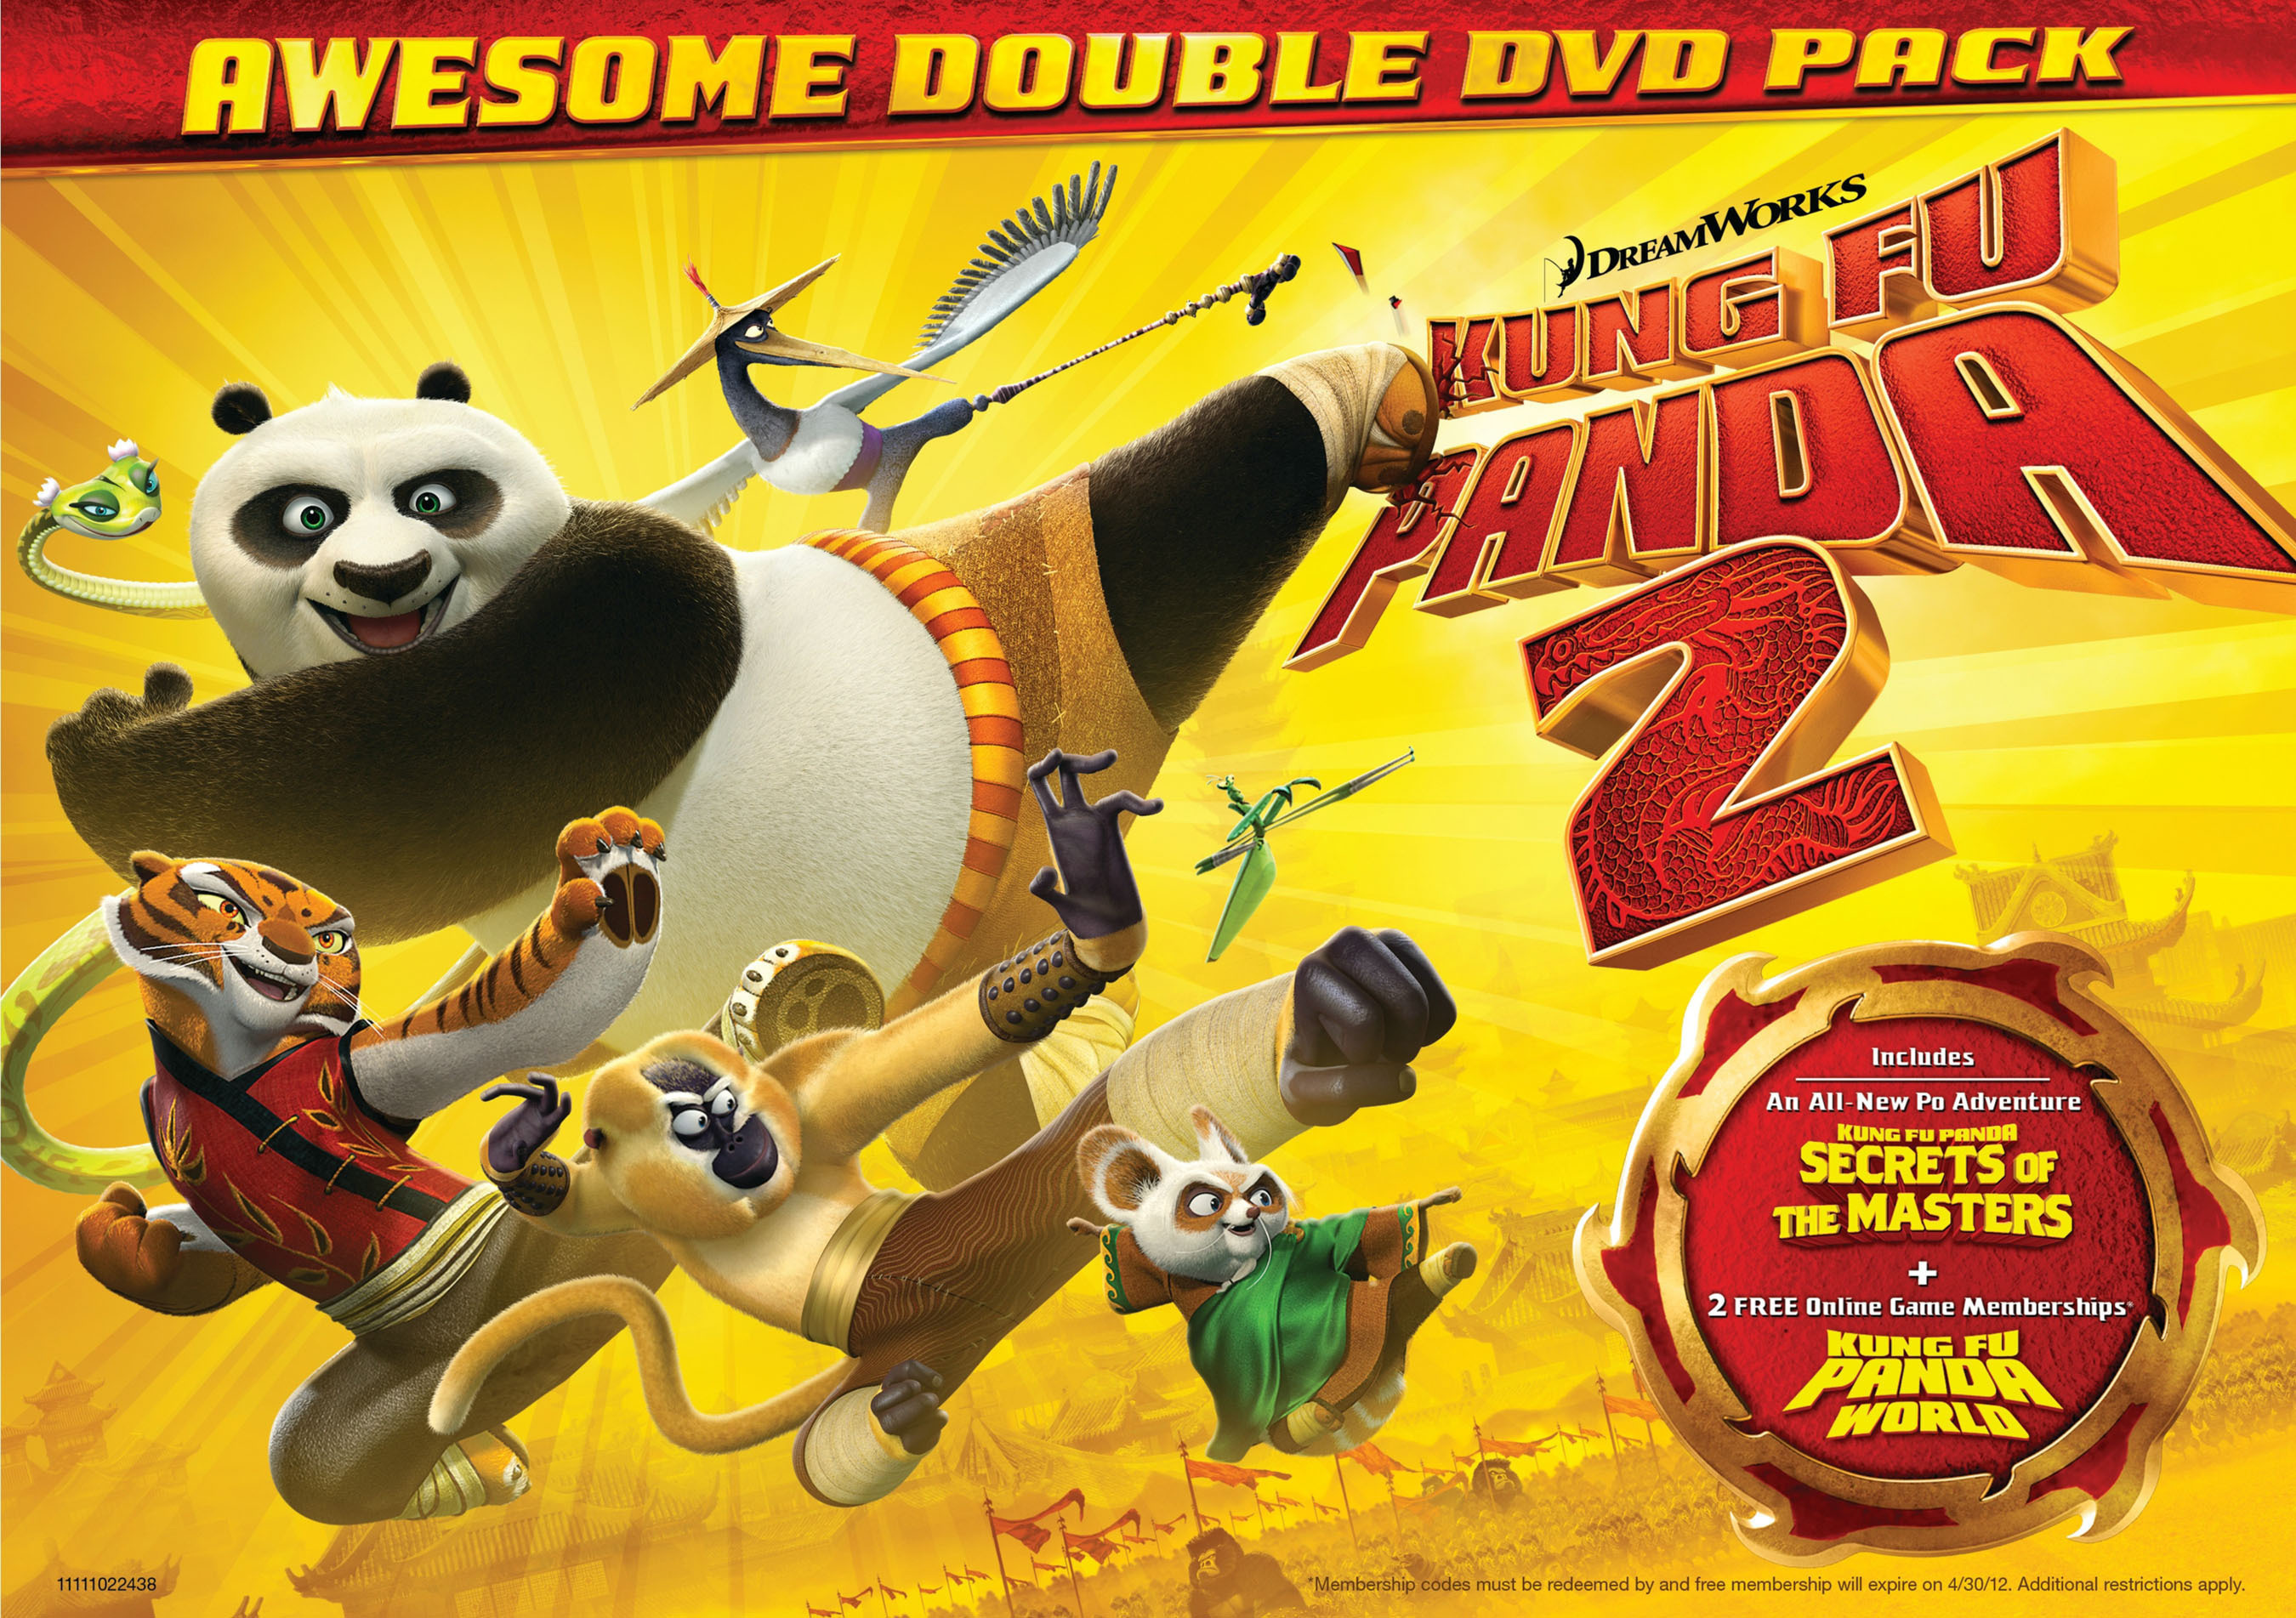 THE HILARIOUS GLOBAL SMASH HIT KUNG FU PANDA 2 BECOMES THE MOST AWESOME  HOLIDAY GIFT PACK ON BLU-RAY™ AND DVD TUESDAY, DECEMBER 13TH